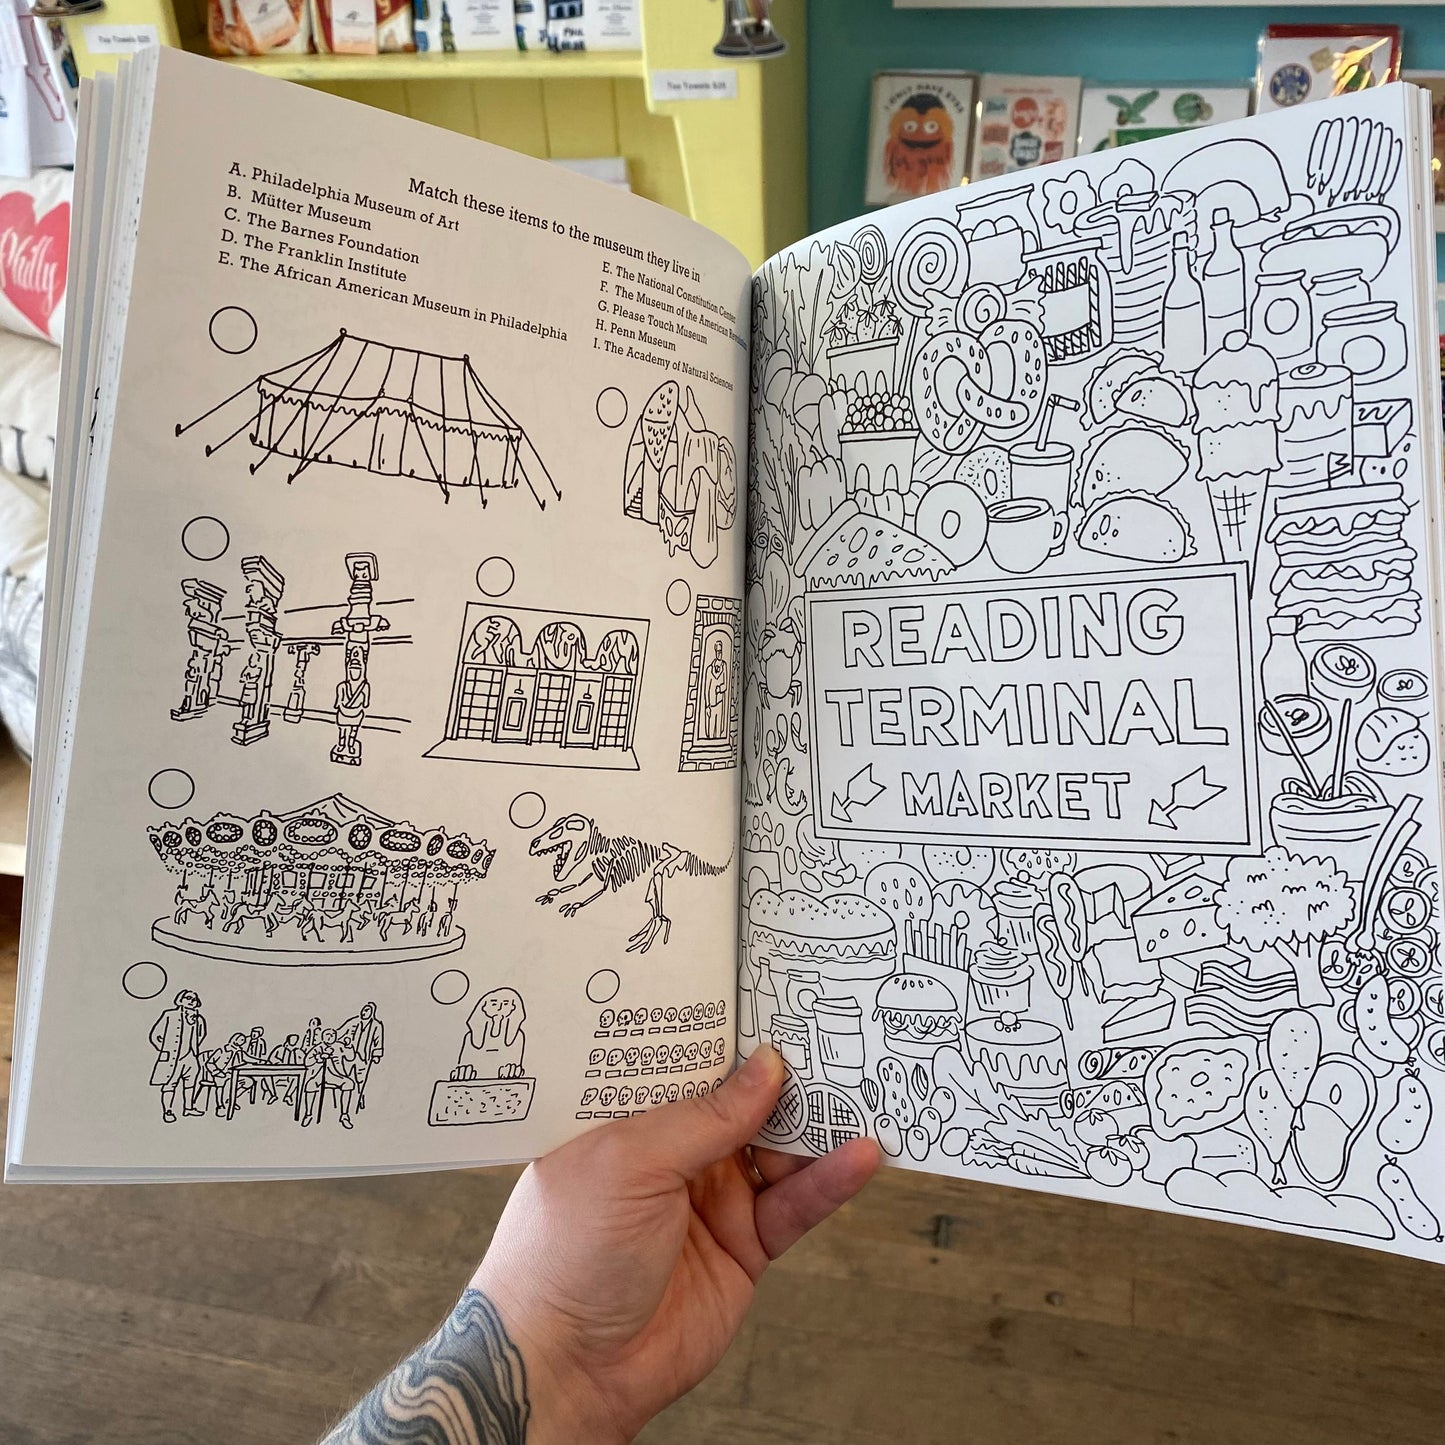 A person holding an open Drawn Jawn Coloring Book by Kate Otte featuring a page with original drawings related to Reading Terminal Market.